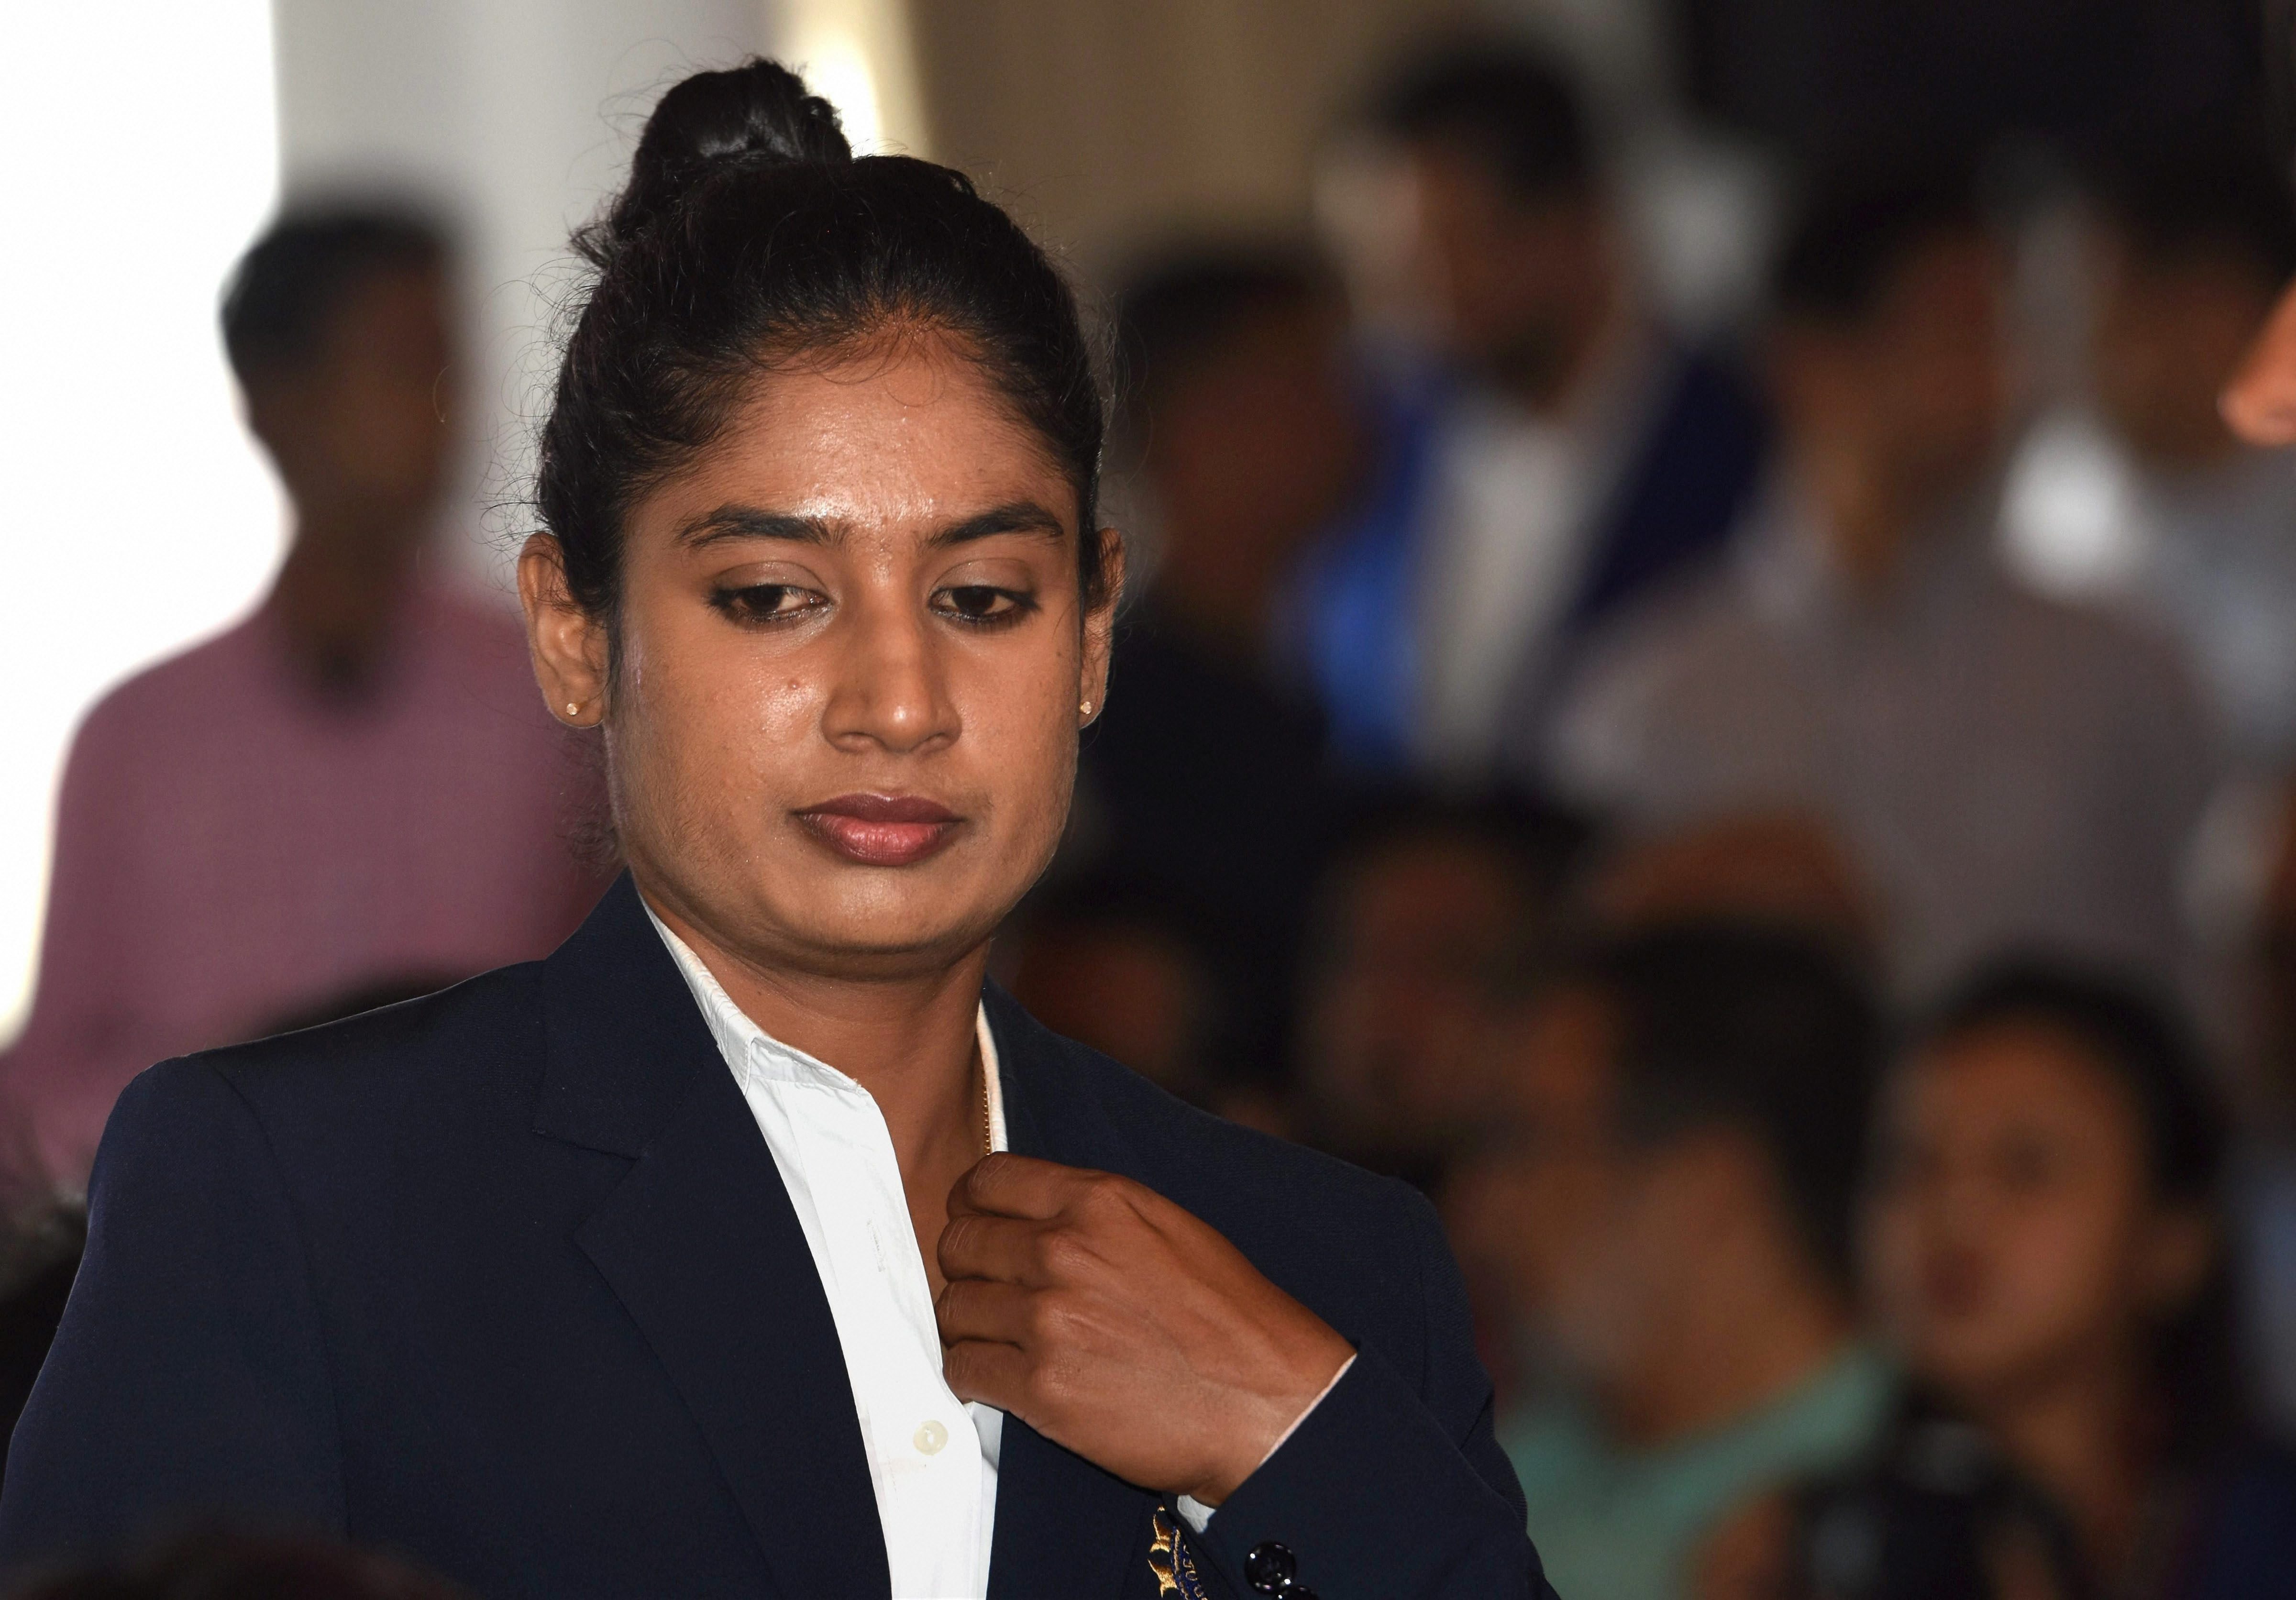 Mithali was dropped from the World T20 semifinal squad despite being fit. India lost the match to England and were knocked out of the tournament.